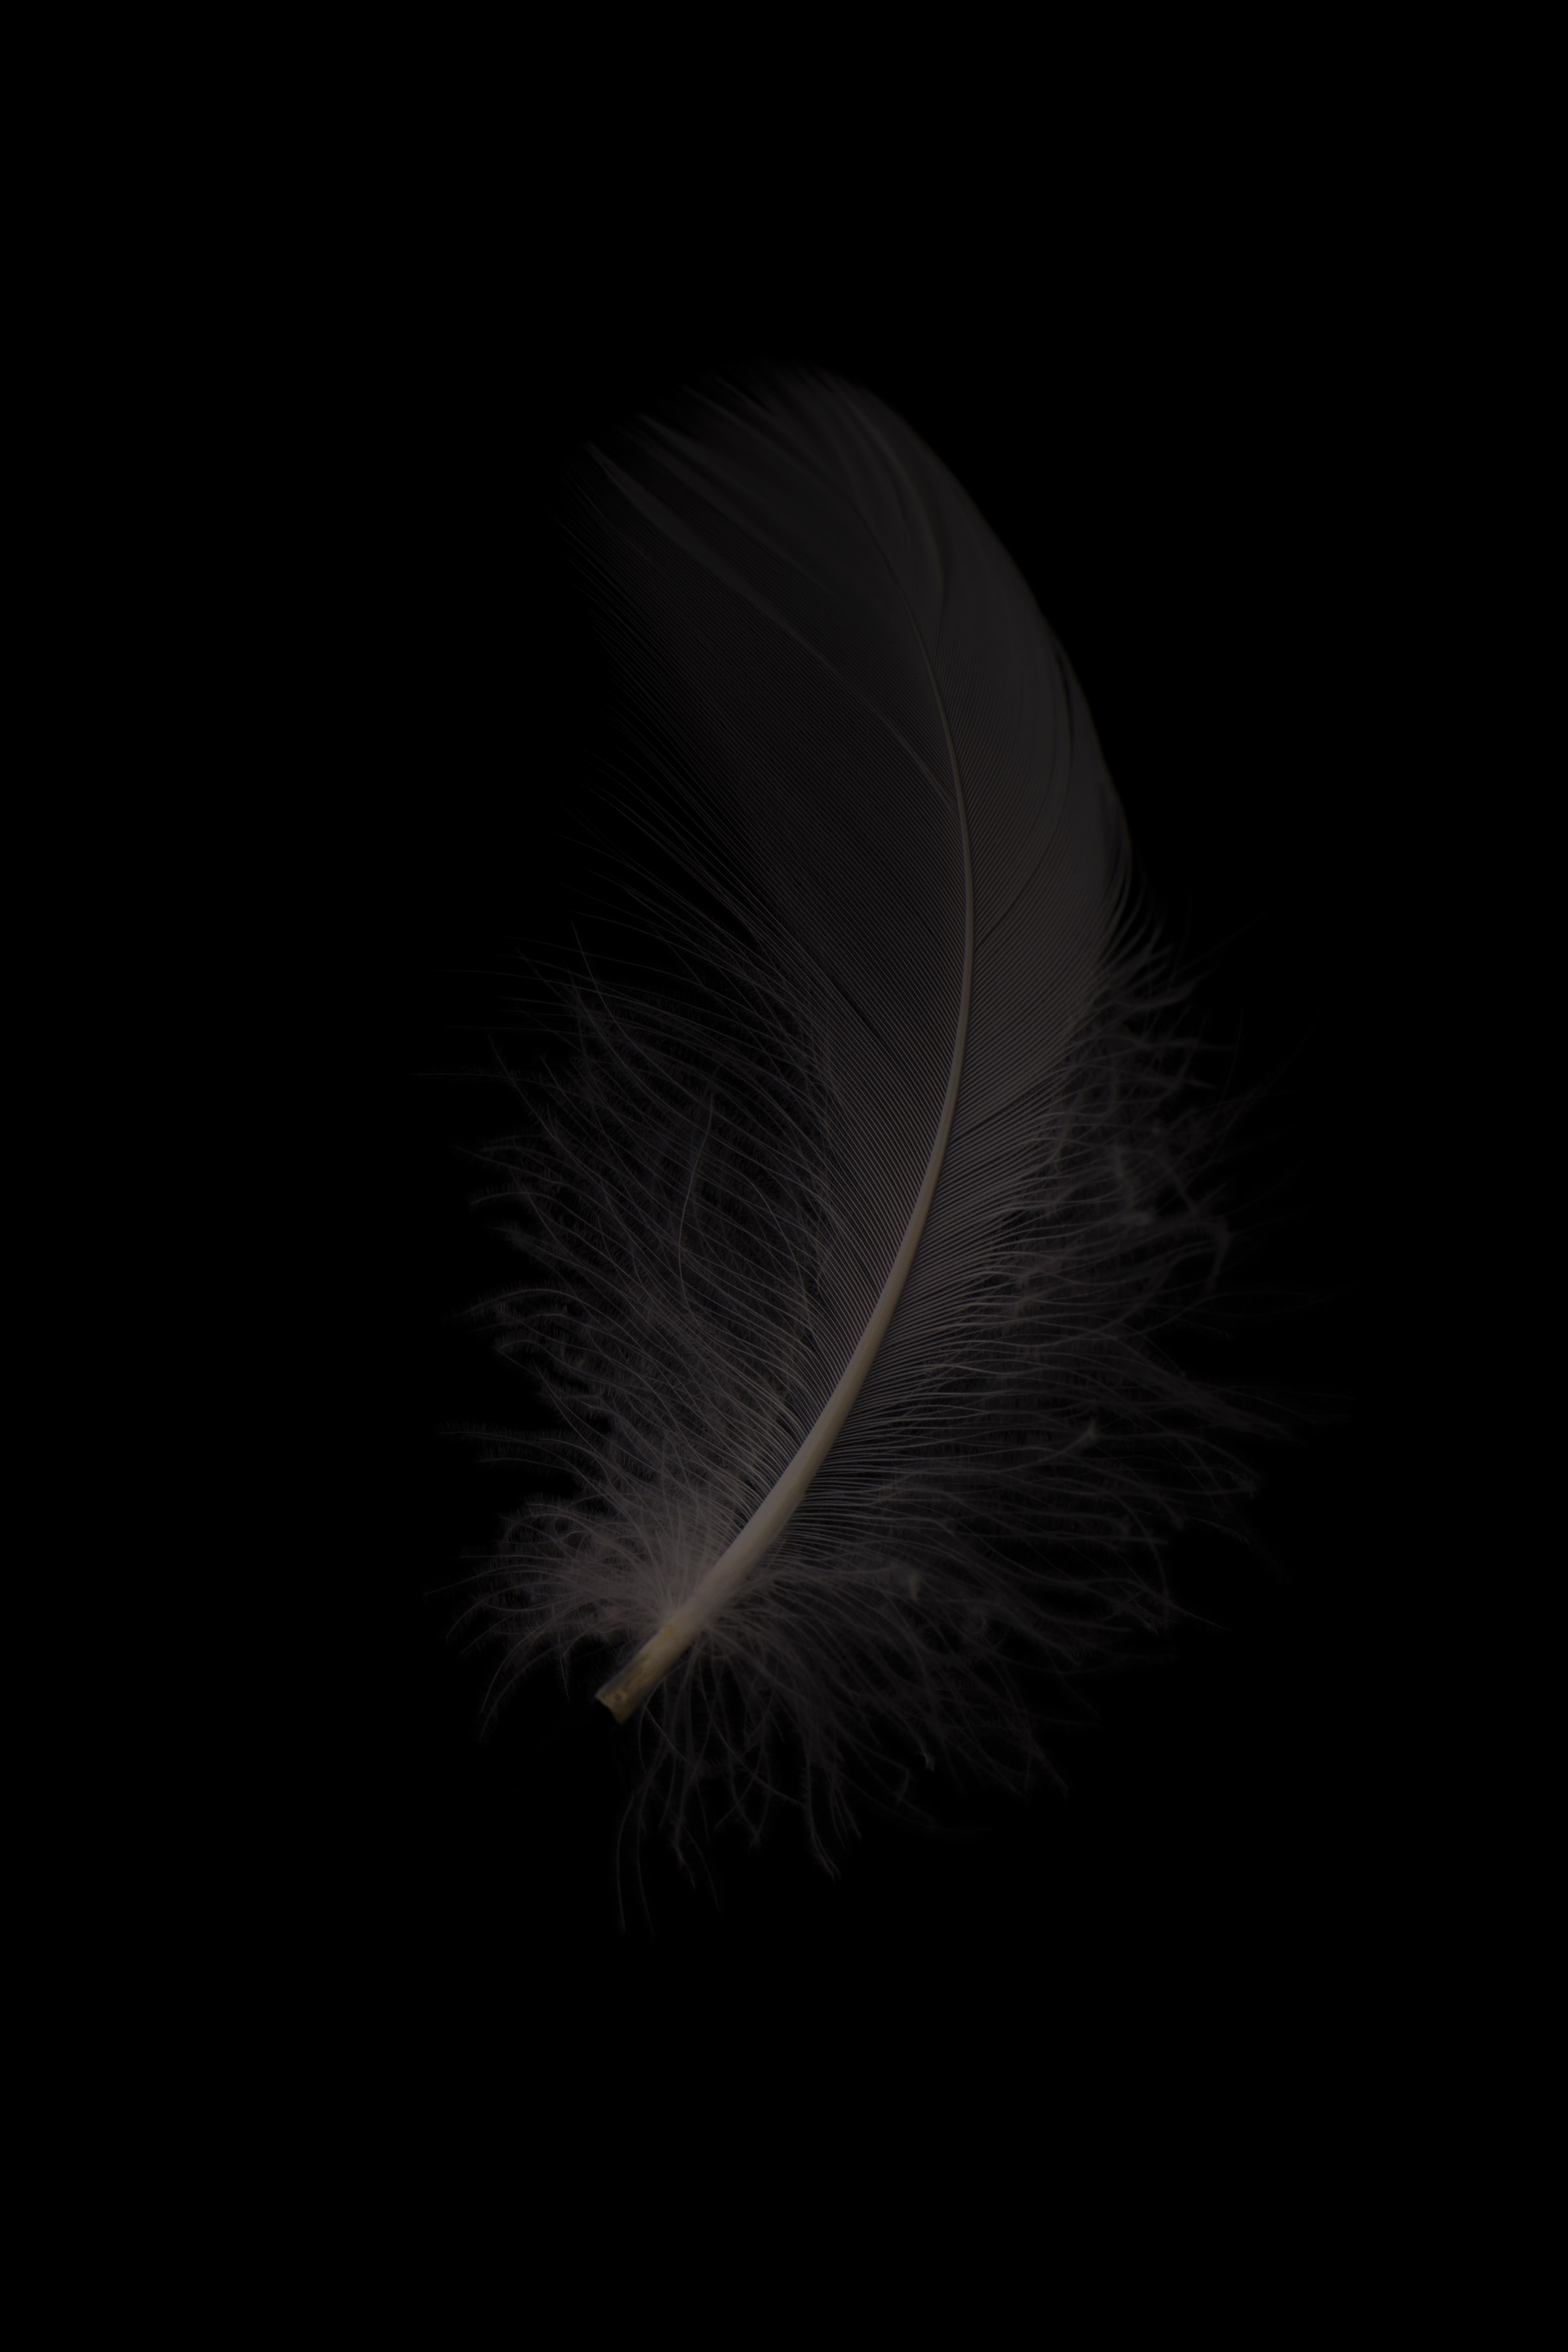 152164 Screensavers and Wallpapers Pen for phone. Download feather, macro, grey, bw, chb, pen pictures for free